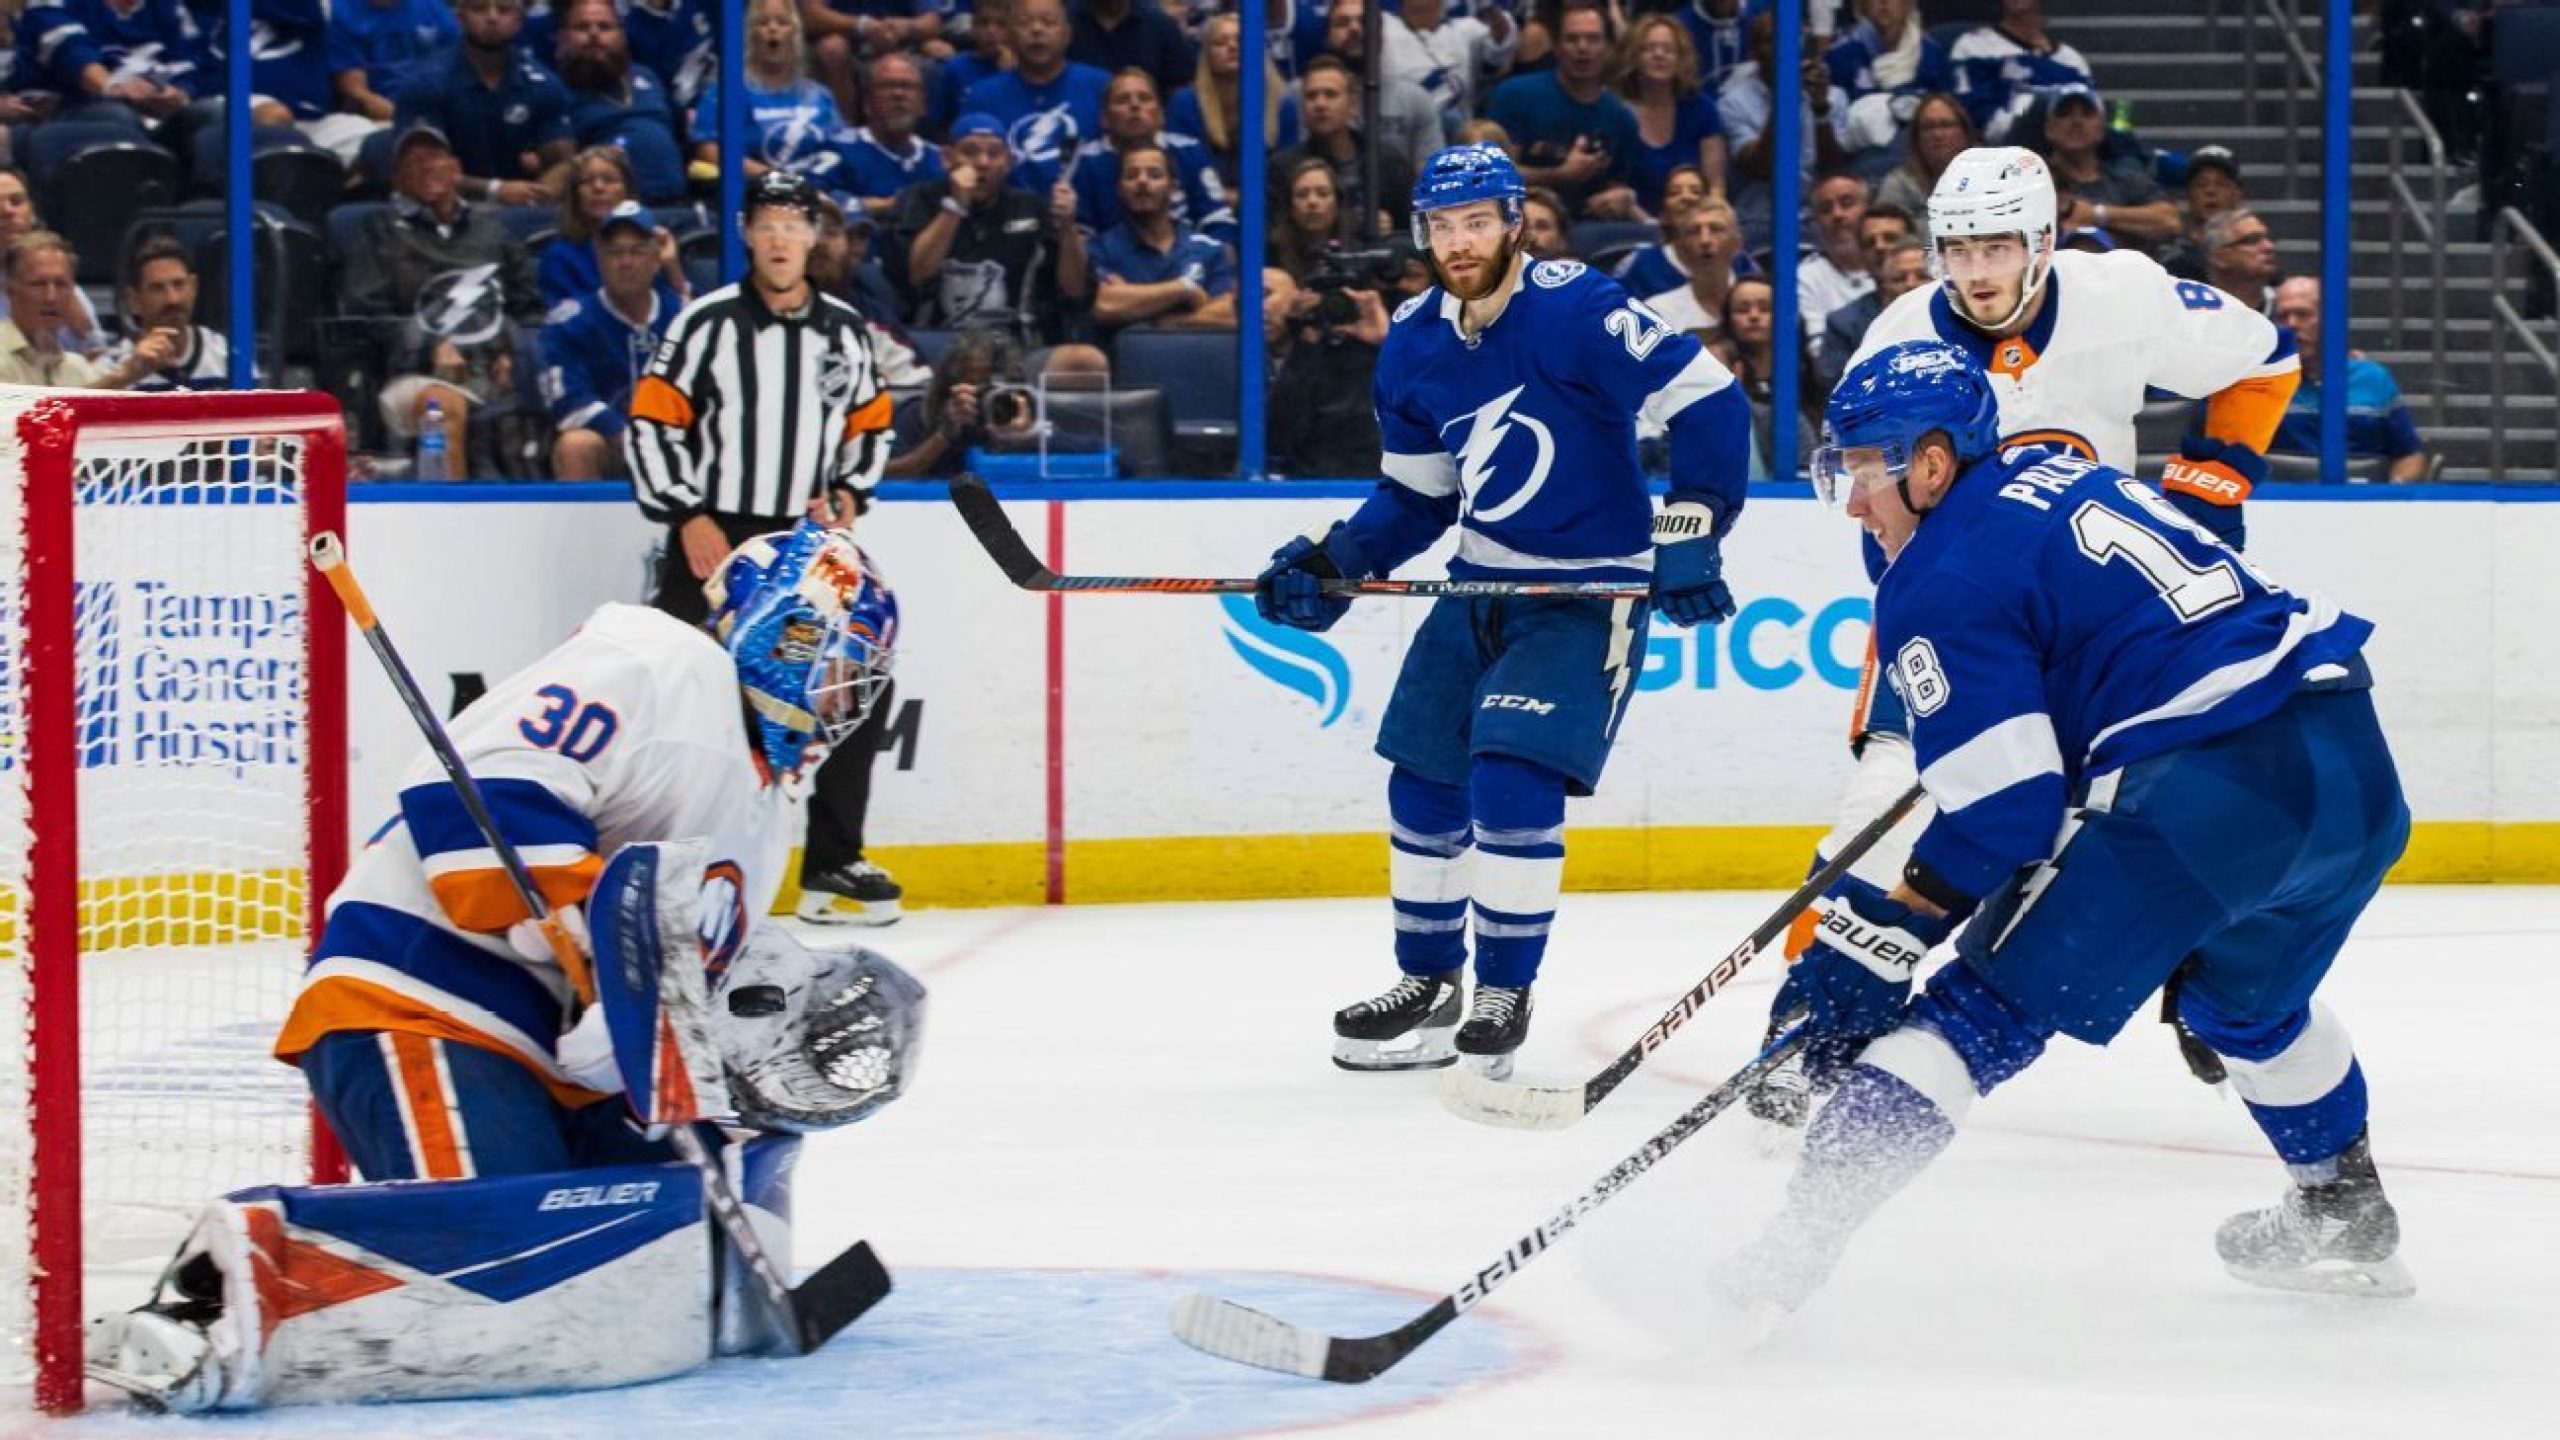 NHL Playoffs Daily: Game 7 on tap for Islanders, Lightning